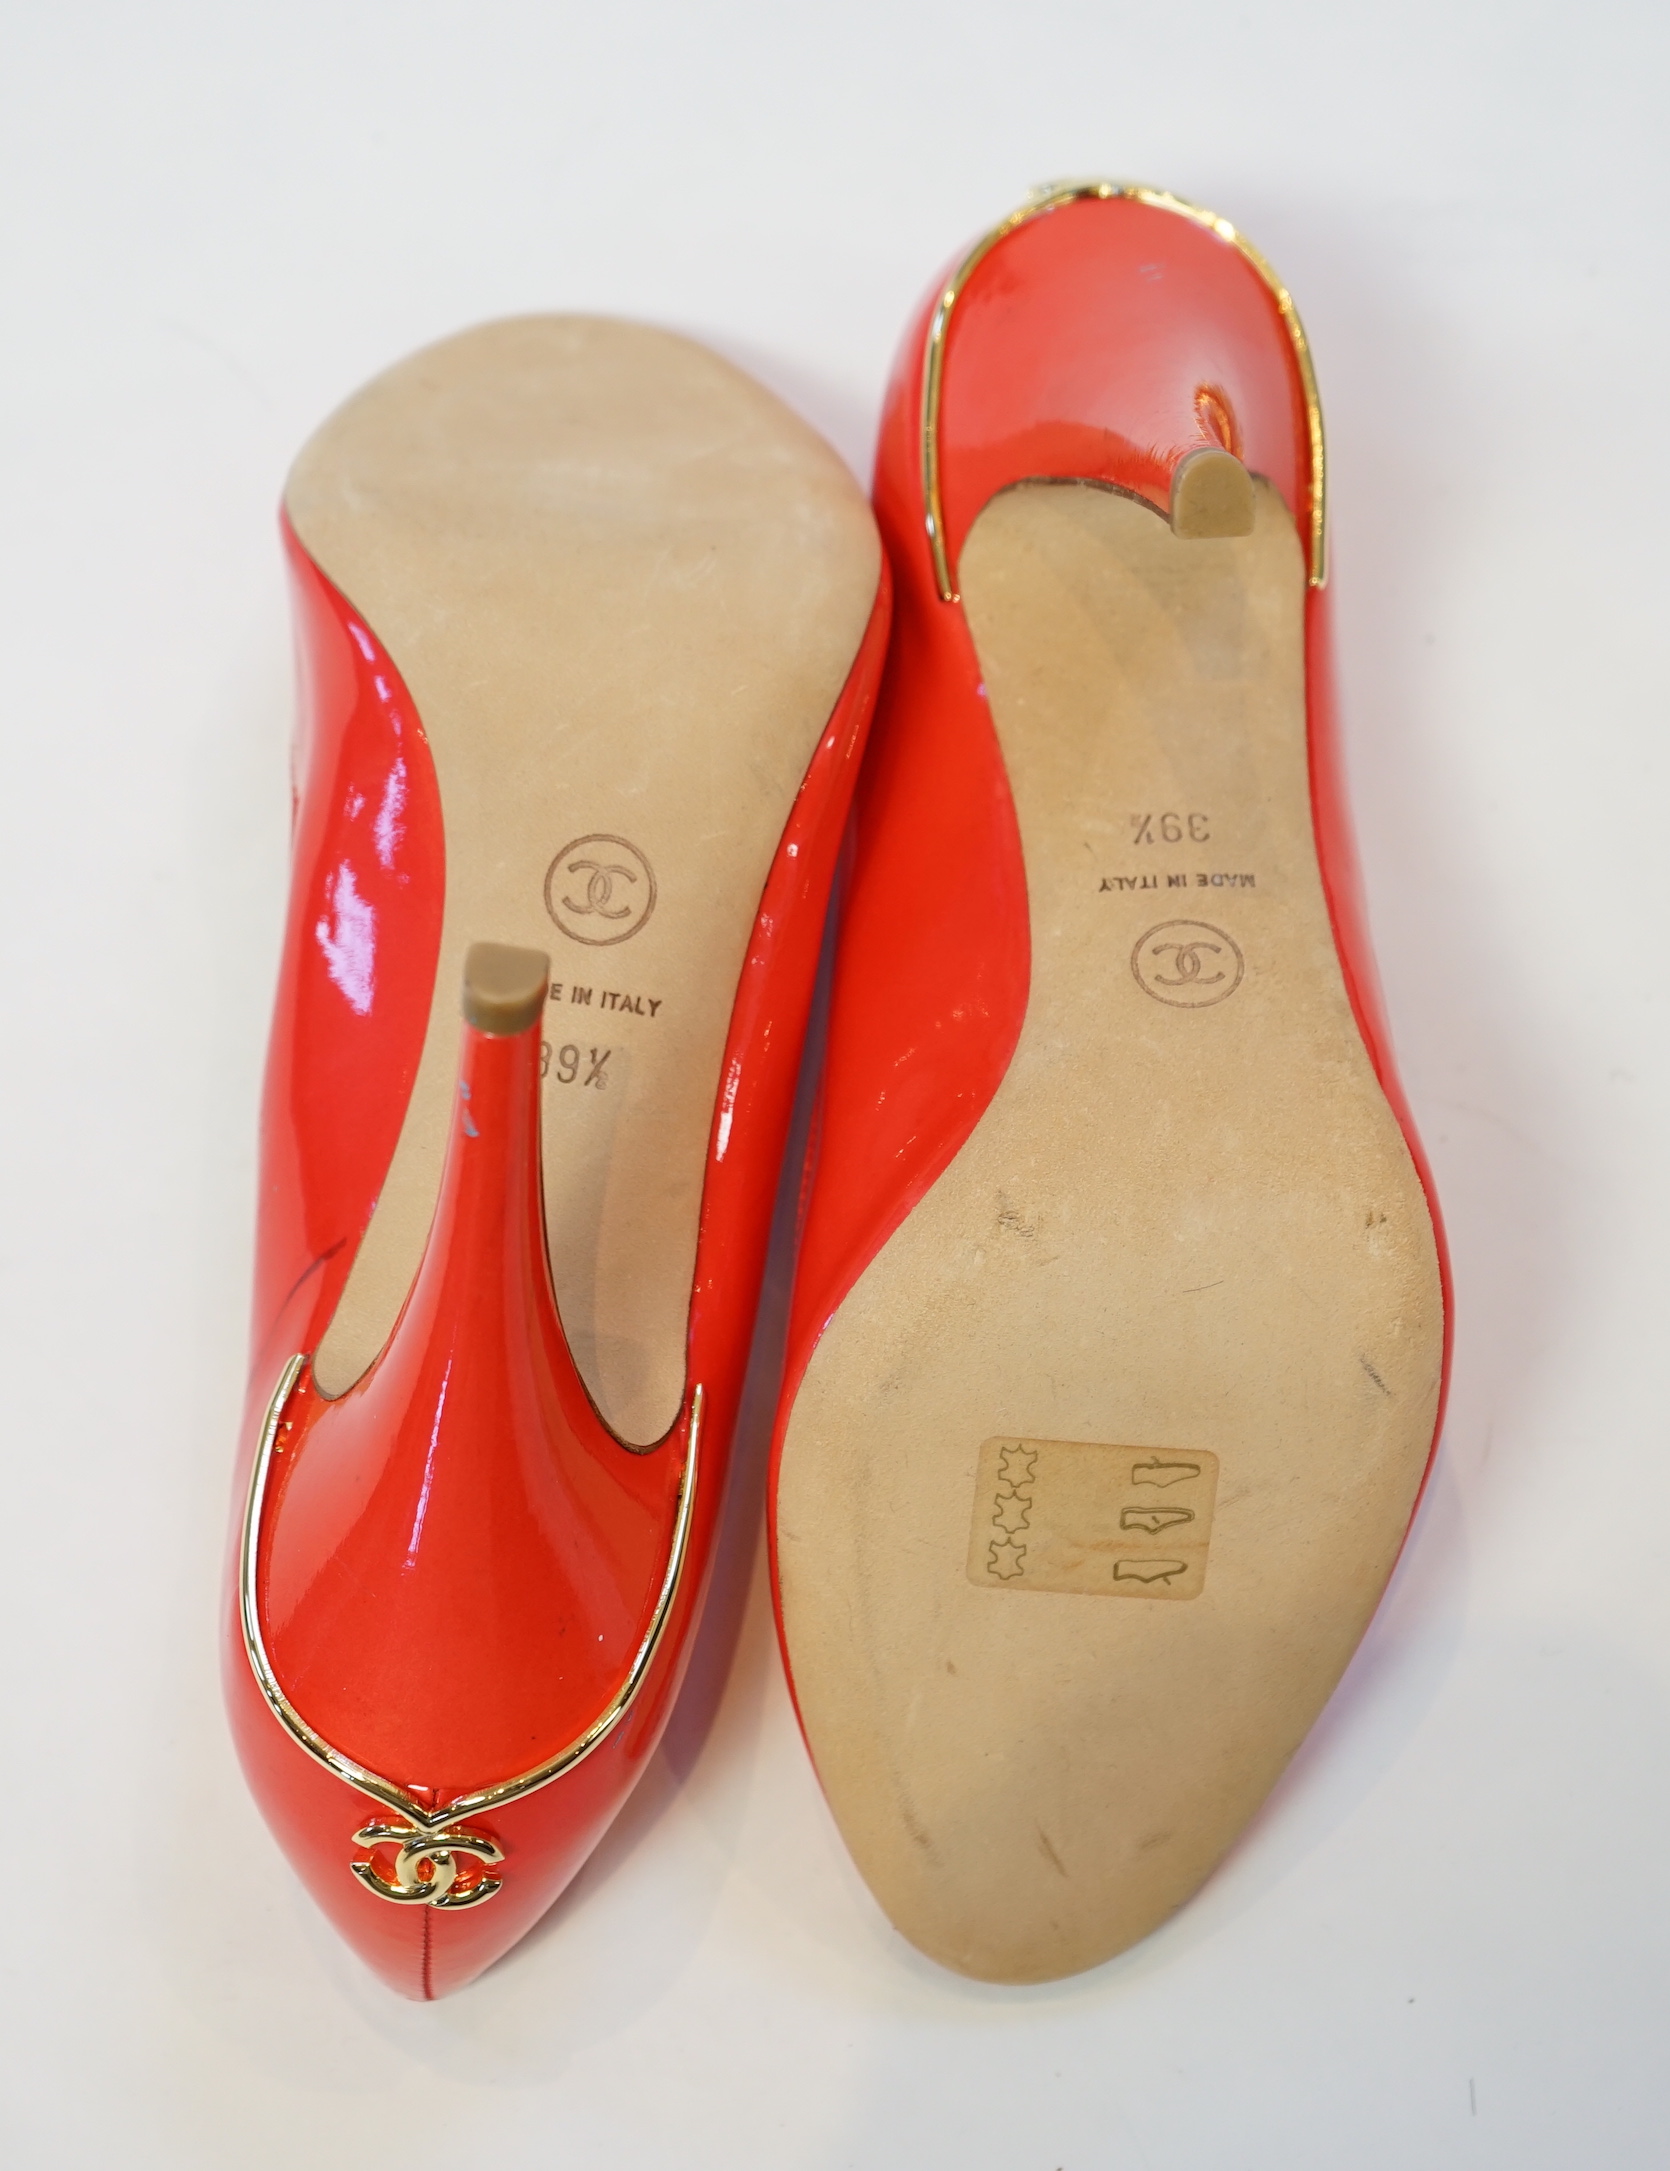 A pair of Chanel lady's metallic coral peep toe patent leather heels, size EU 39.5